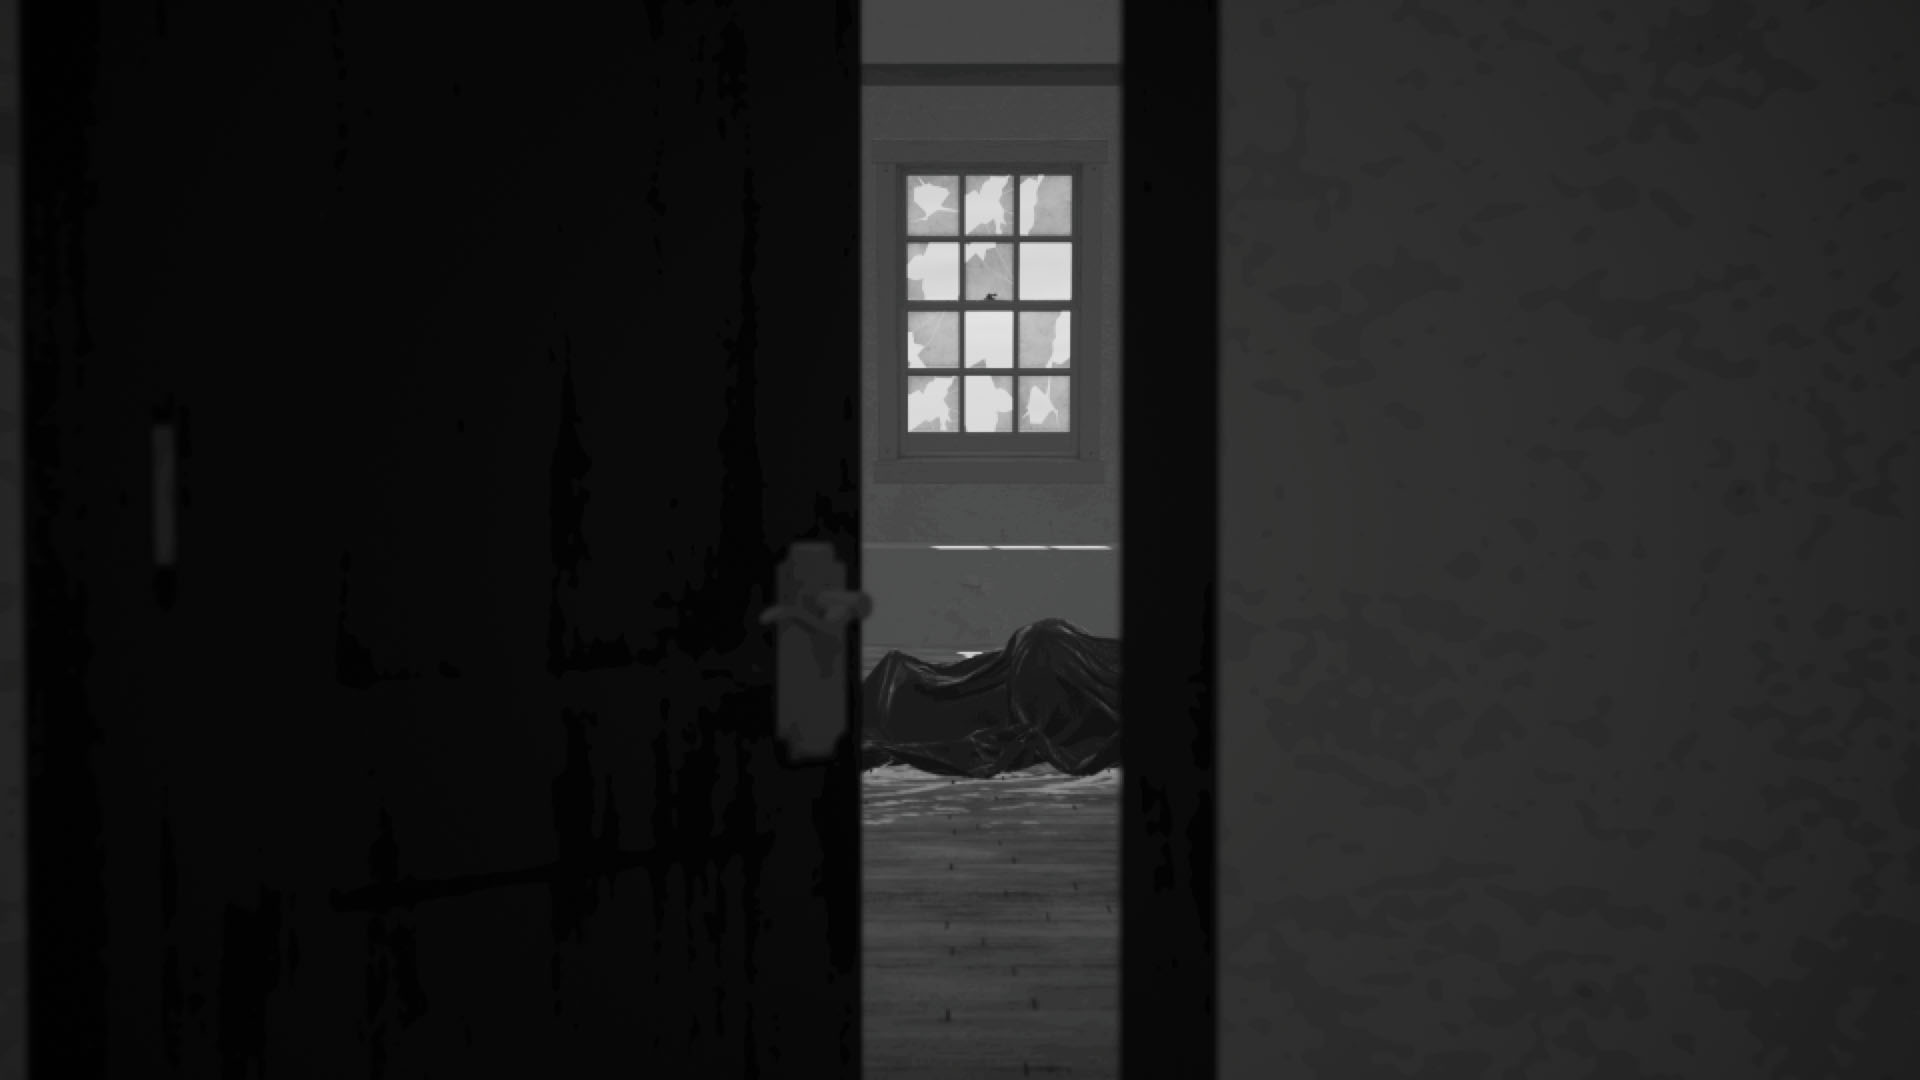 Monochromatic screenshot from the game with a partially open door and a motionless figure on the ground.